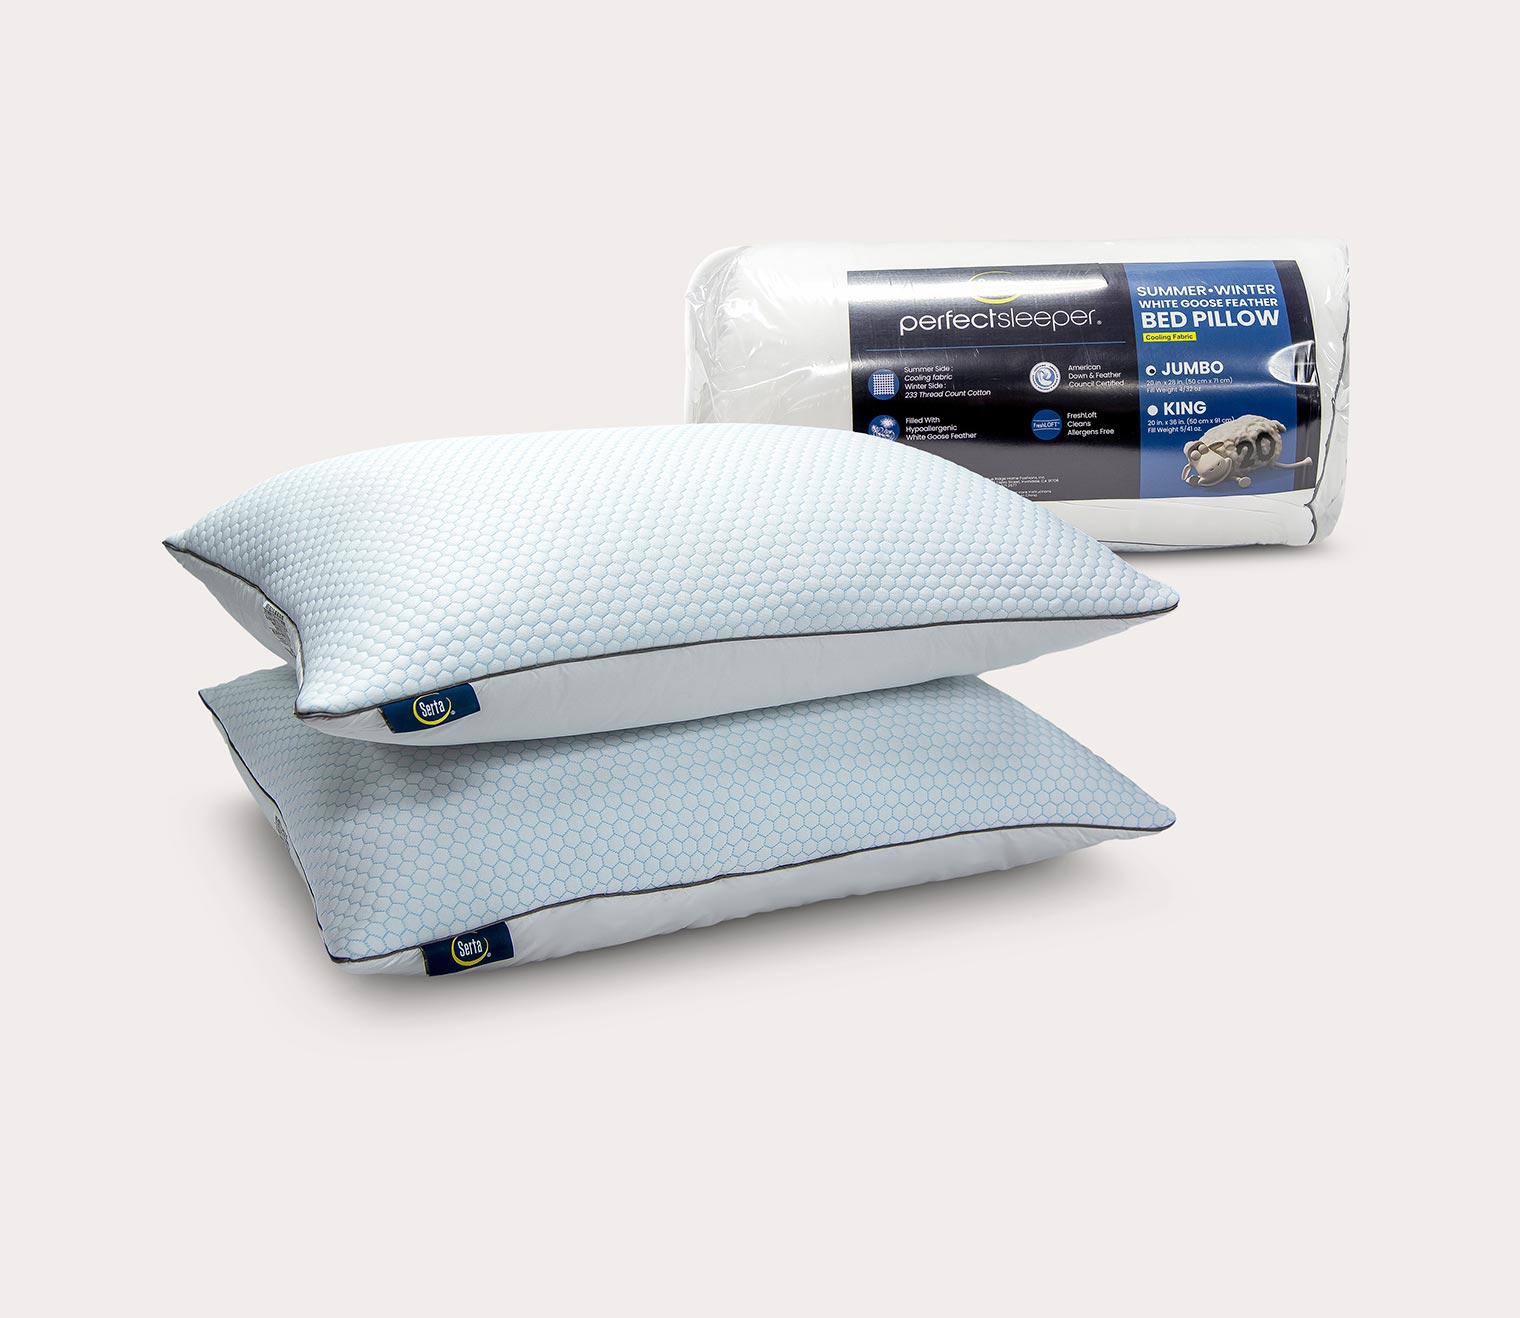 Summer and Winter White Goose Feather Pillow 2-Pack by Serta